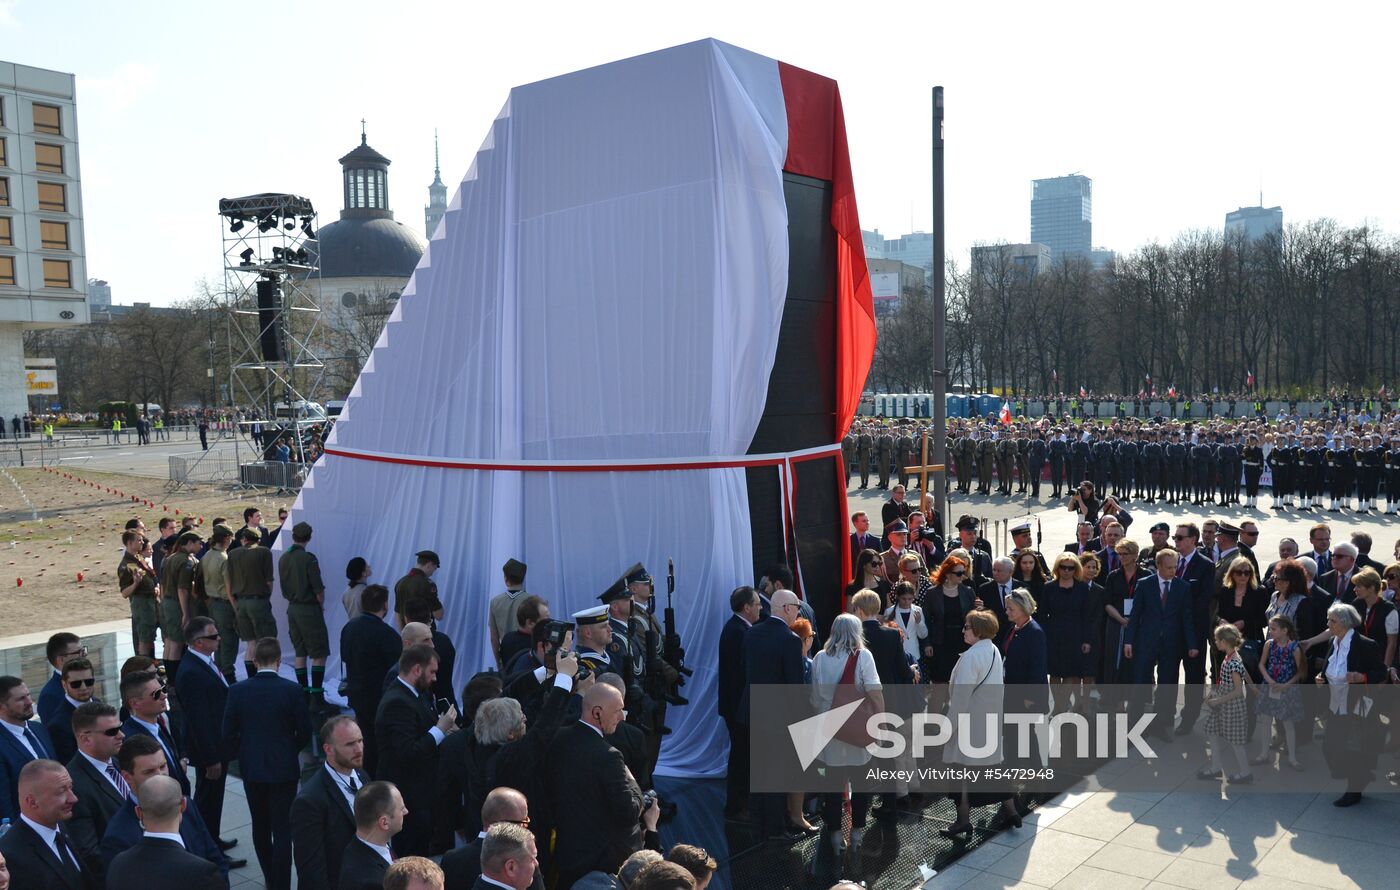 Memorial for victims of Tupolev Tu-154 crash near Smolensk unveiled in Warsaw